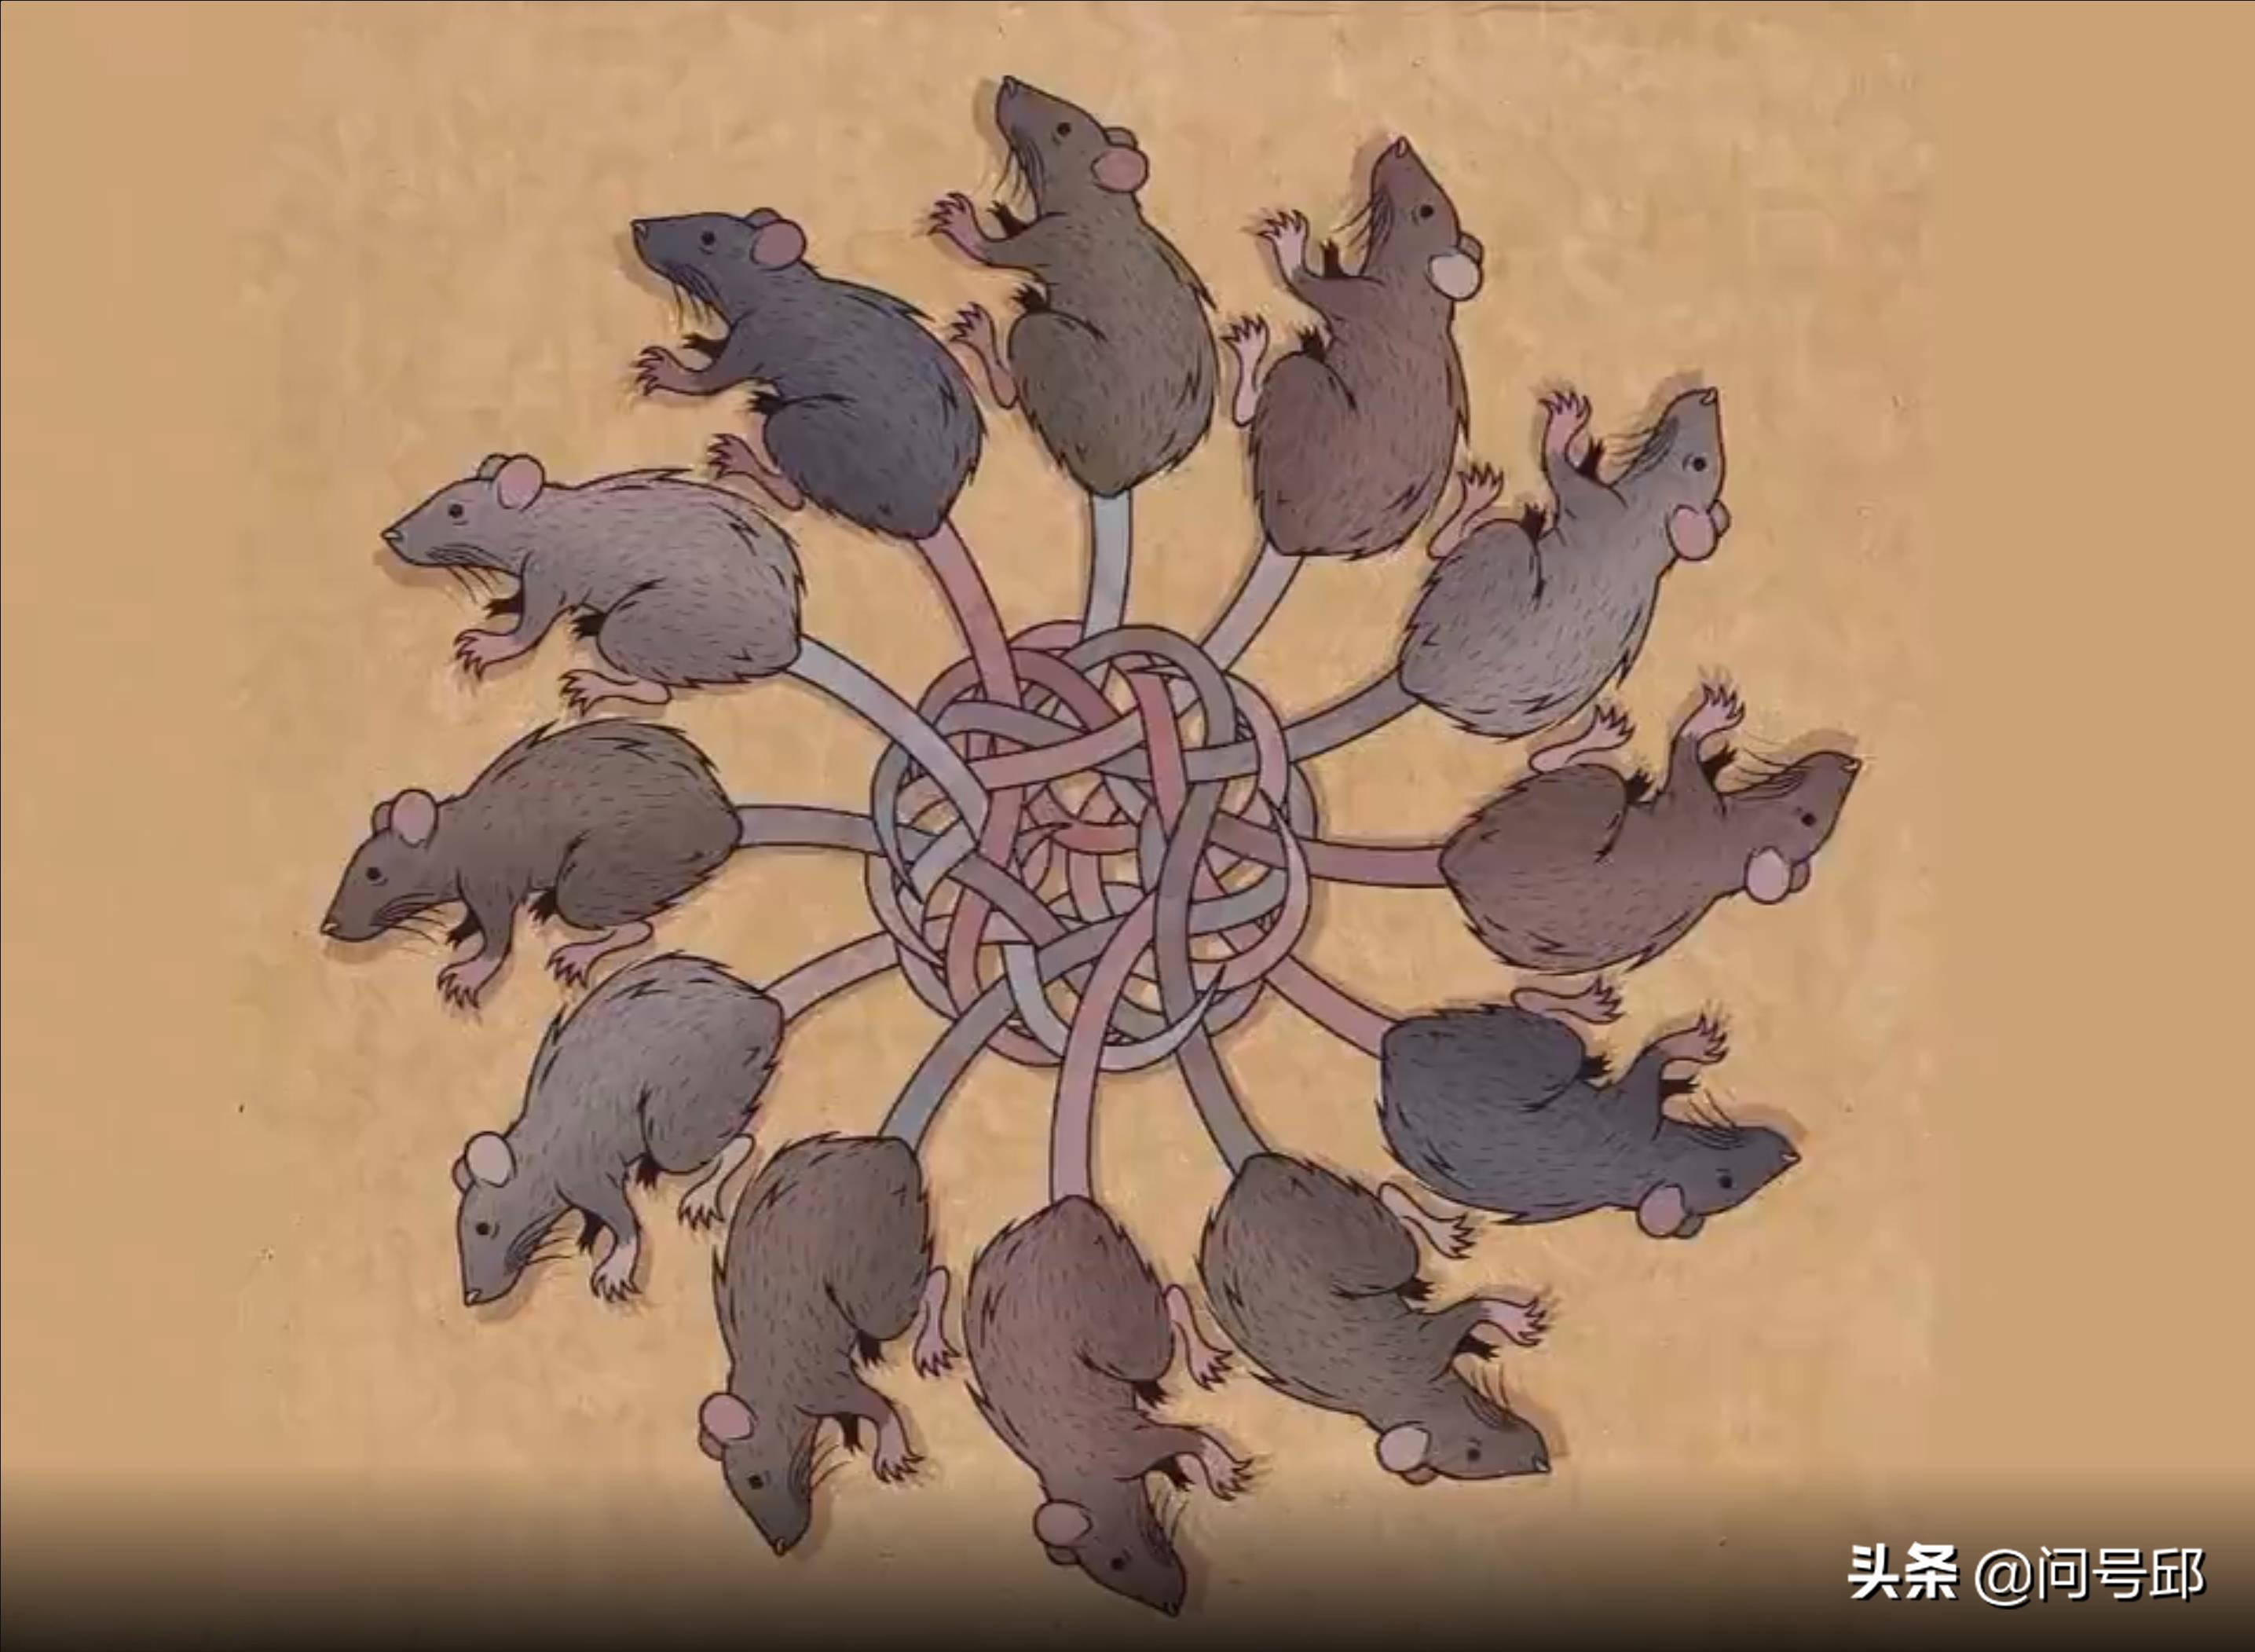 A rat king. A group of rats whose tails have become so entangled